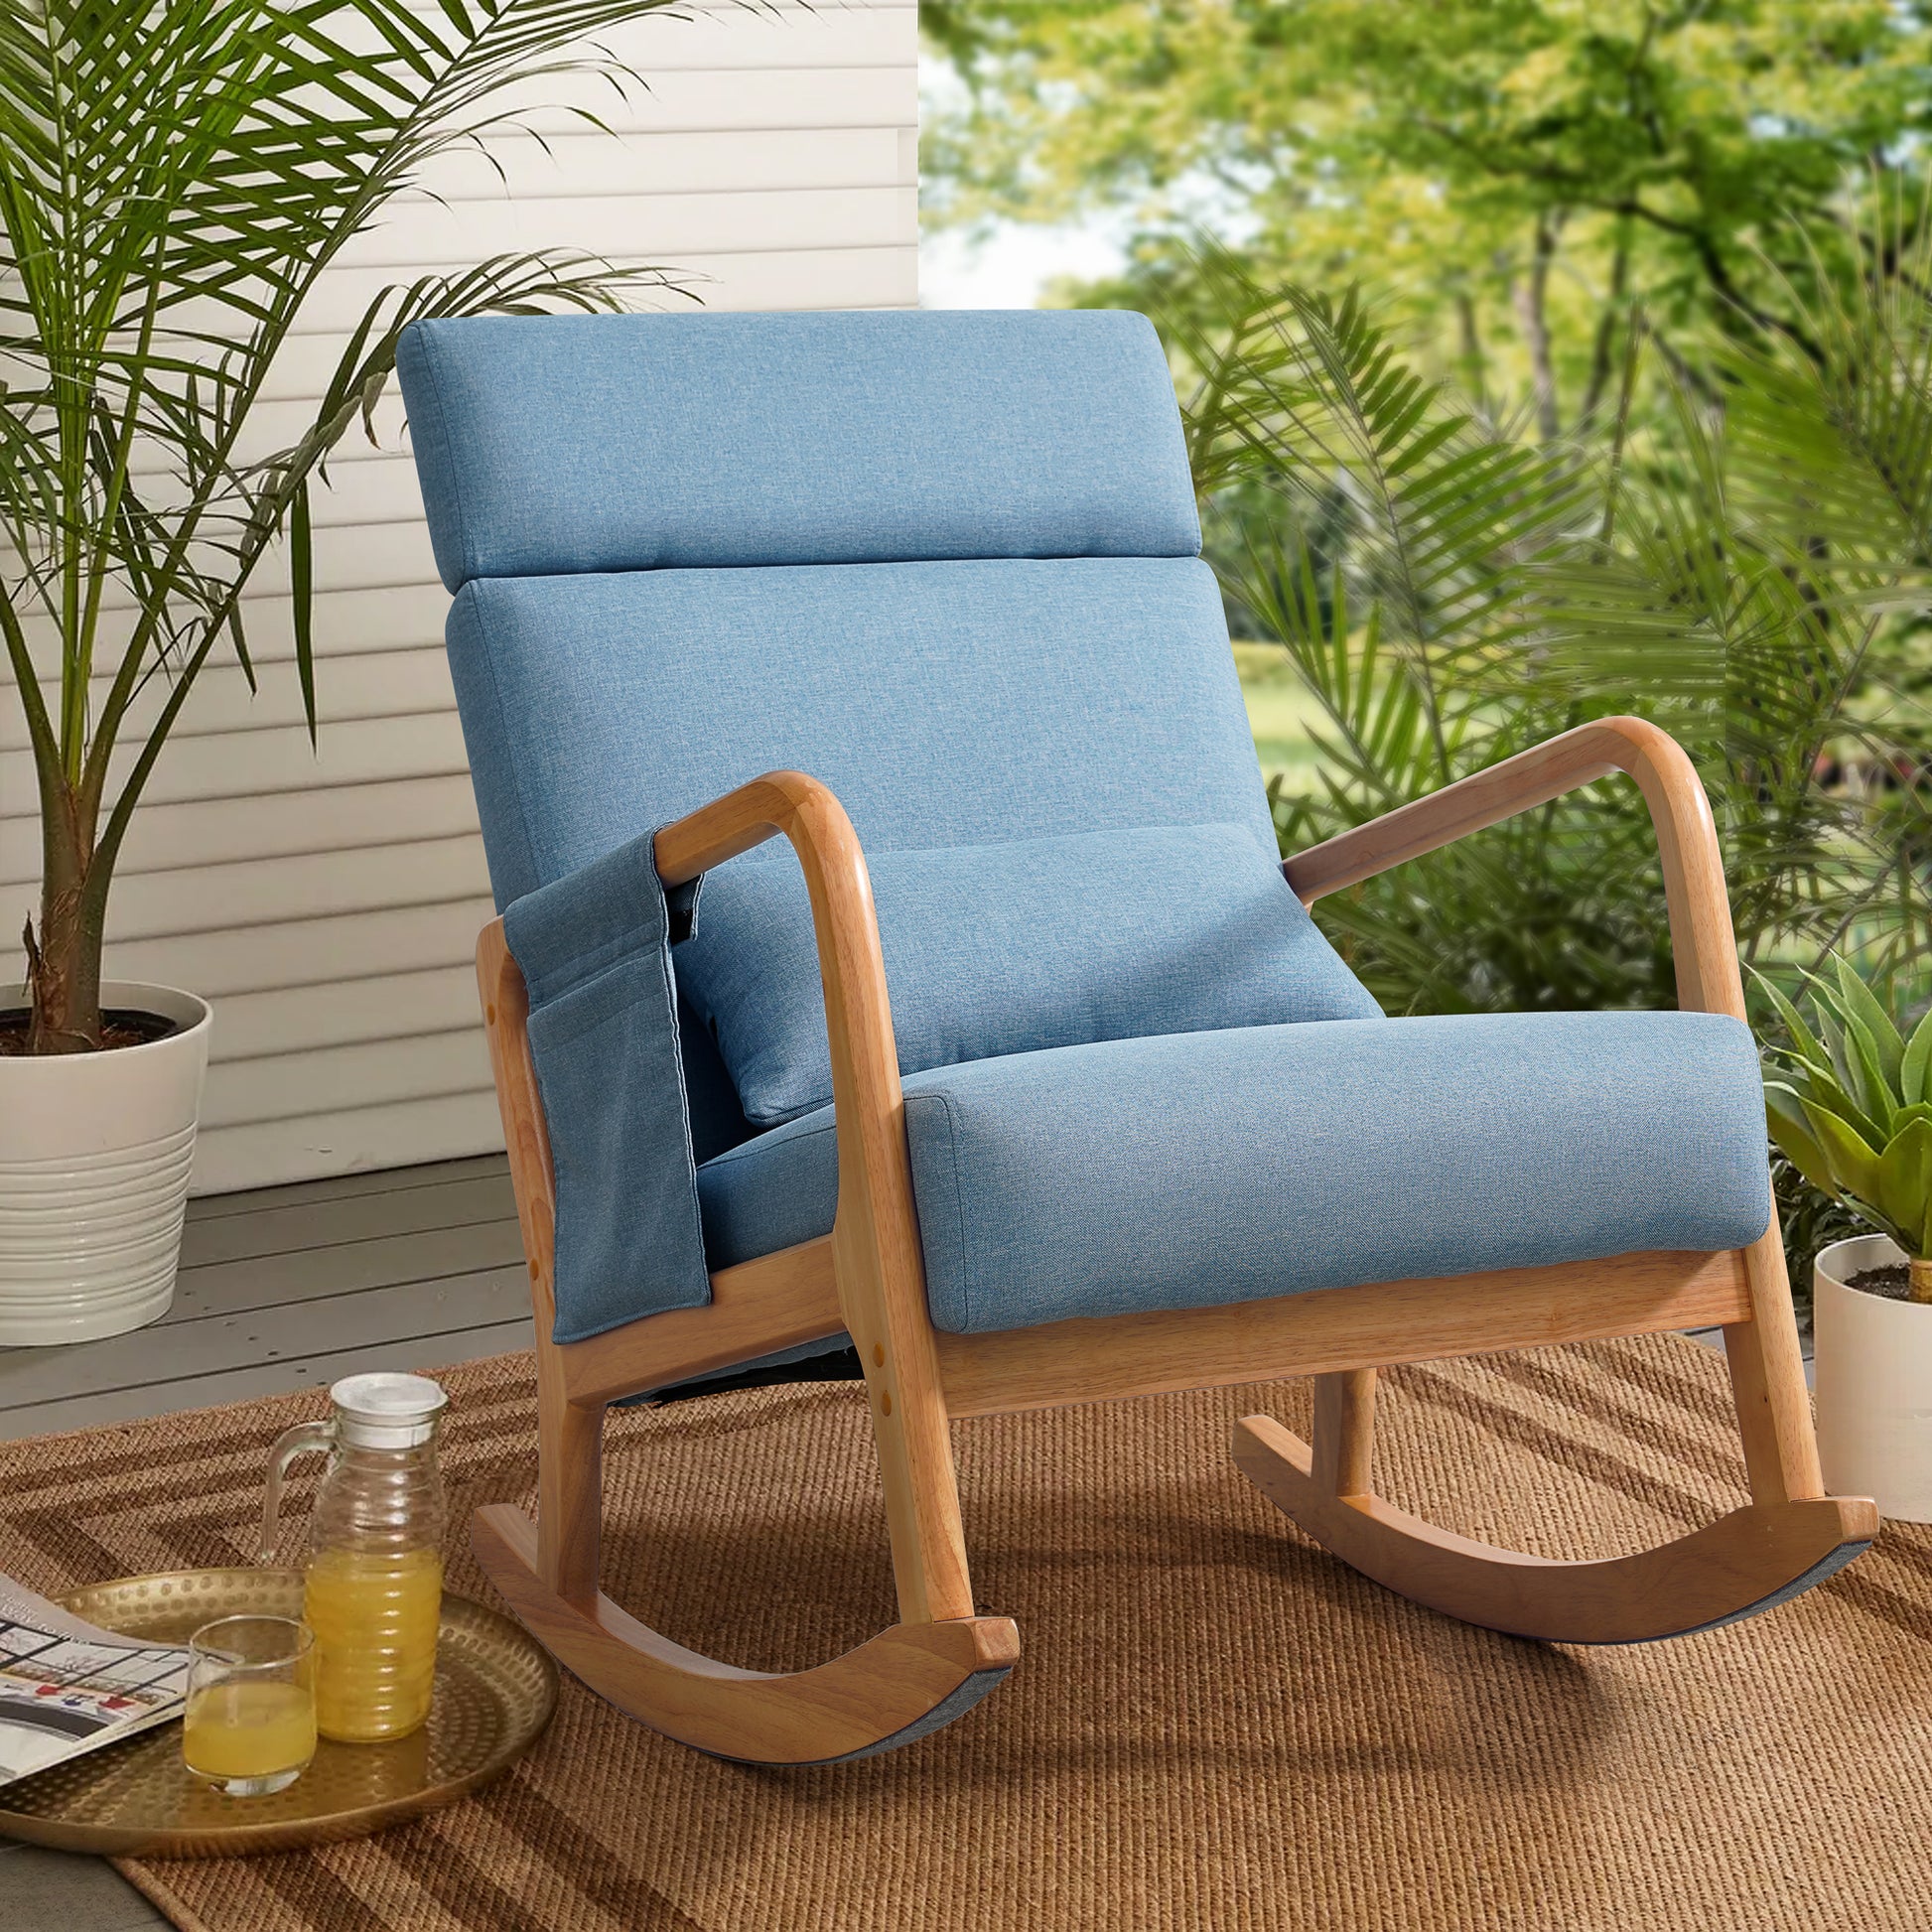 Coosleephome Wooden Rocking Chair Nursery with Adjustable Backrest